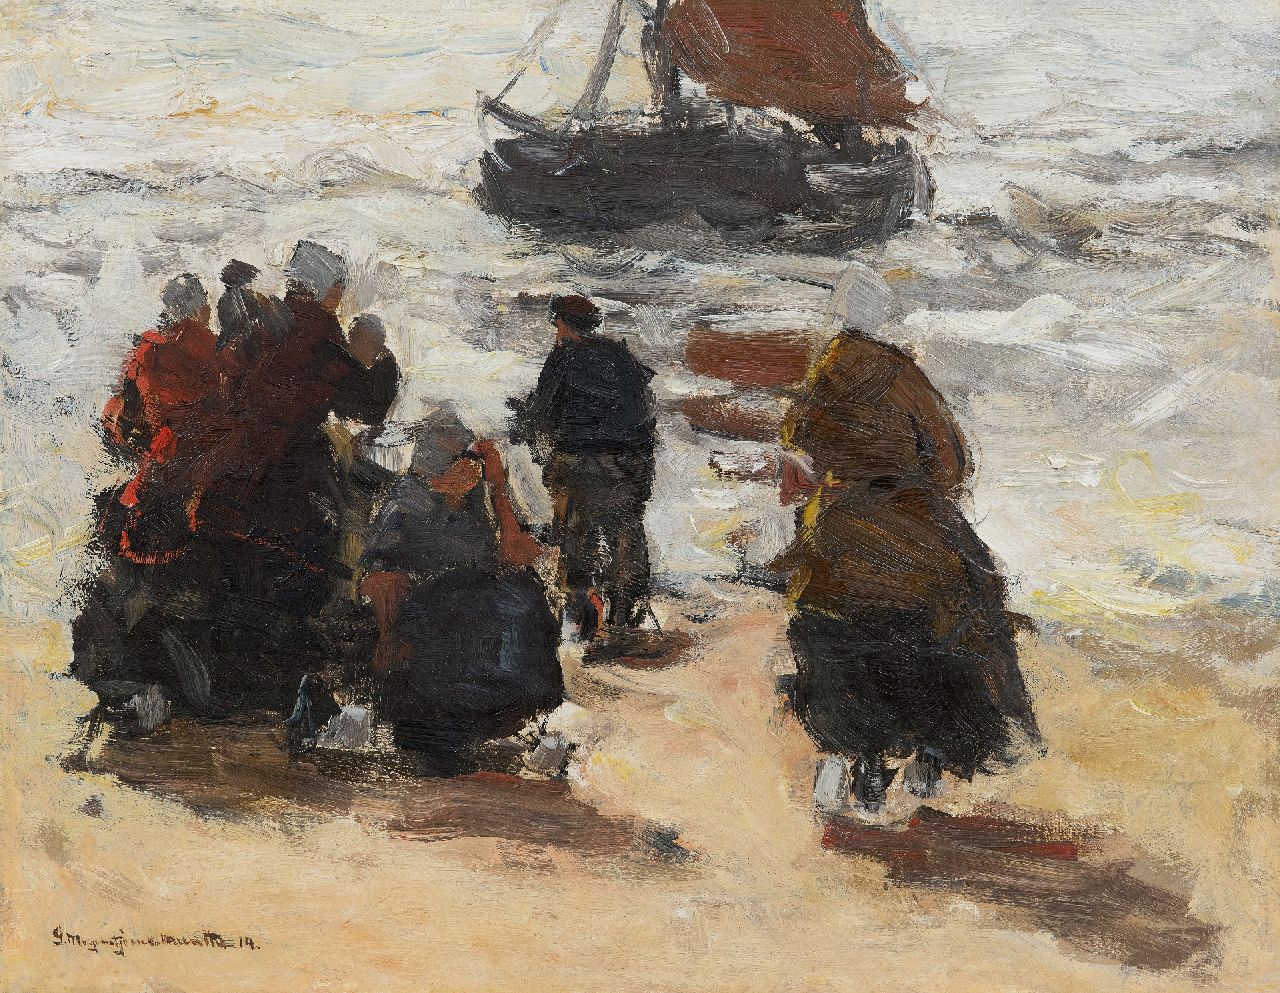 Munthe G.A.L.  | Gerhard Arij Ludwig 'Morgenstjerne' Munthe | Paintings offered for sale | The arrival of the fishing barge, oil on canvas laid down on panel 40.1 x 51.1 cm, signed l.l. and dated '14